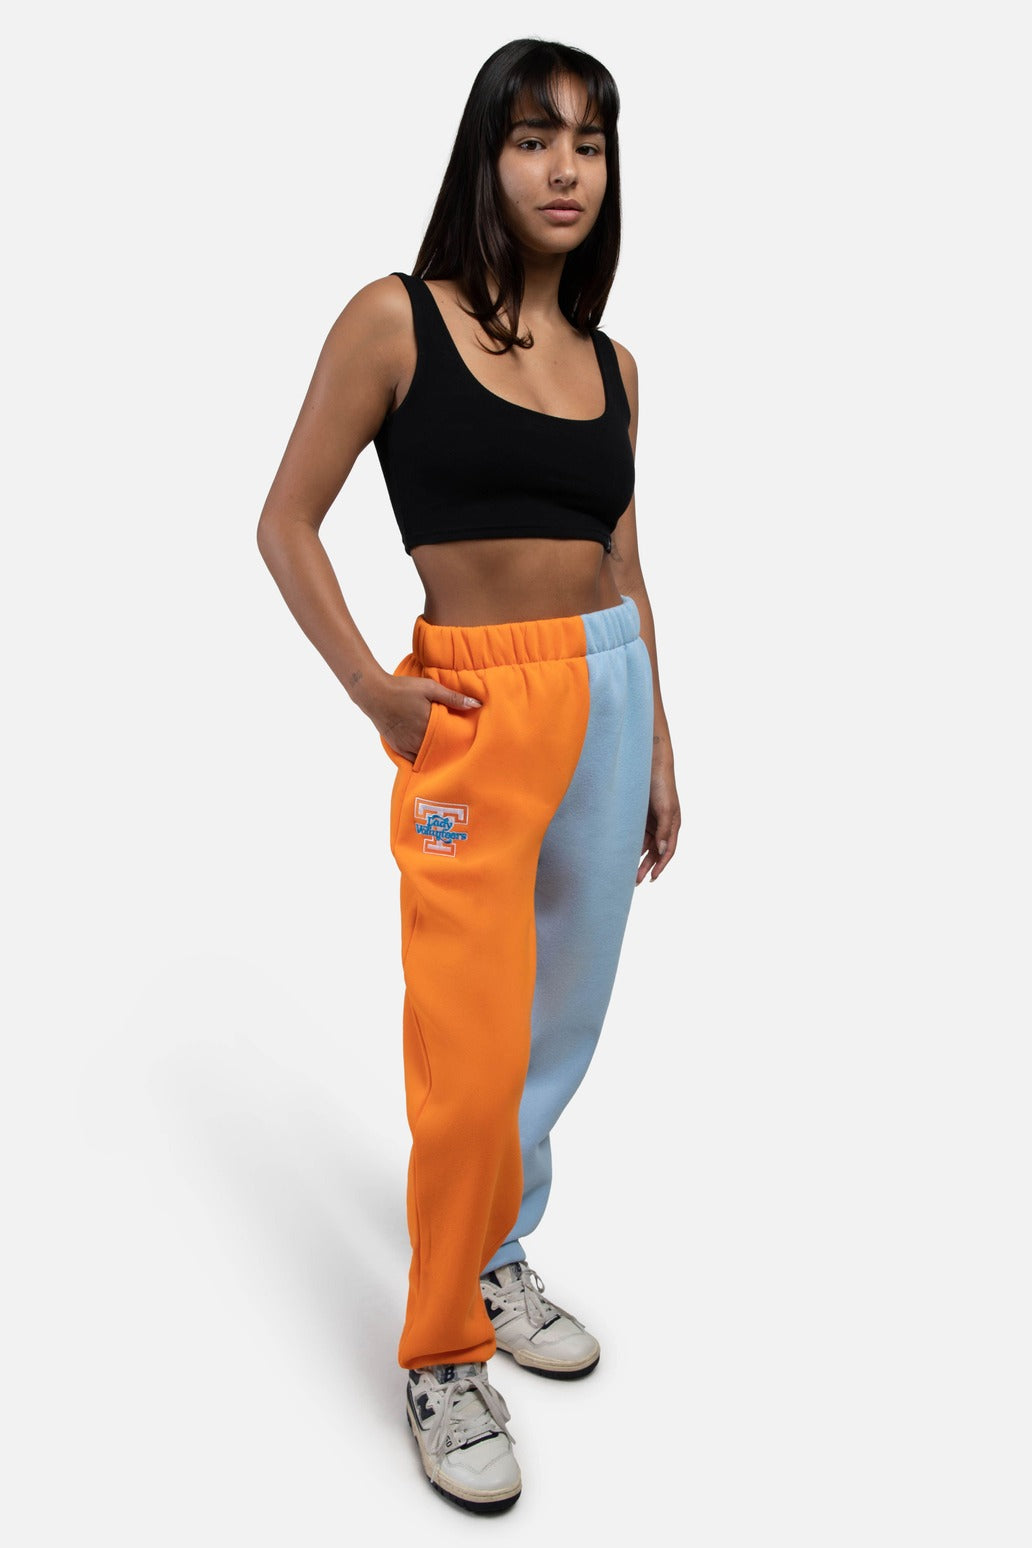 University of Tennessee Color-Block Sweats